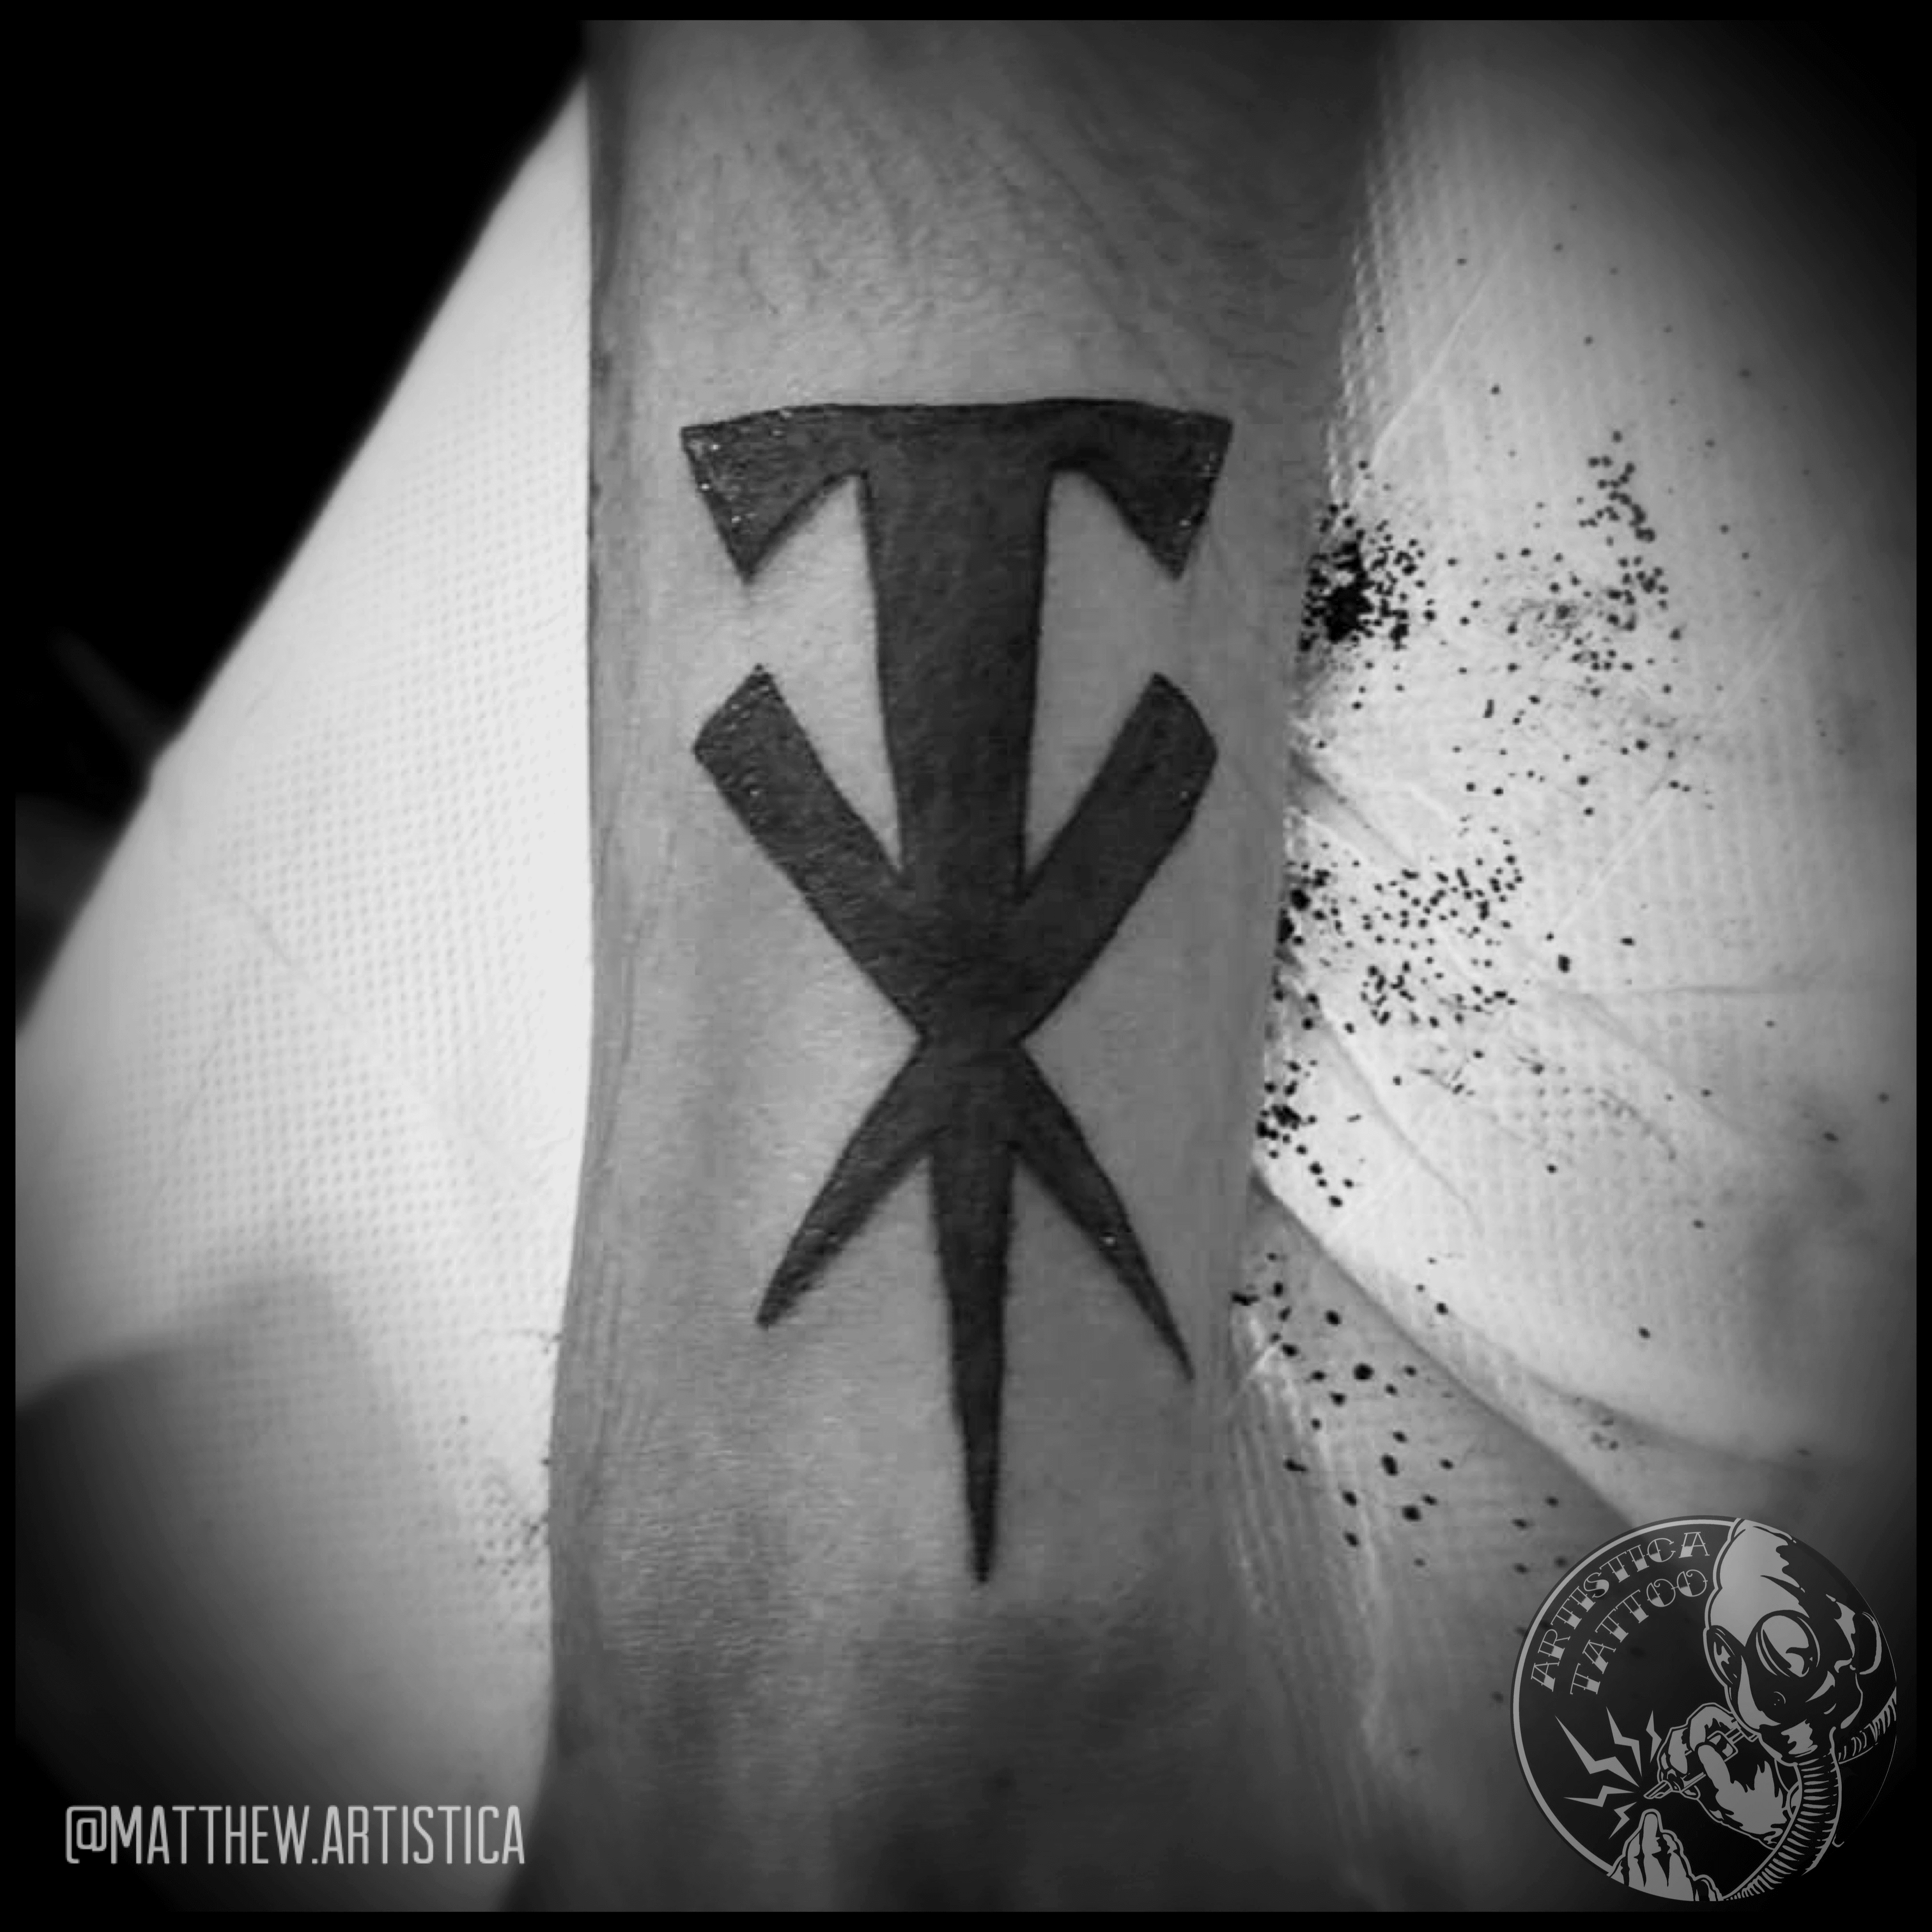 Tattoo uploaded by ARTISTICA TATTOO SG  The Undertaker logo tattooed by  our artist Matthew Wanna get a tattoo by him Just drop him a message at  65 86142048 for enquiry or